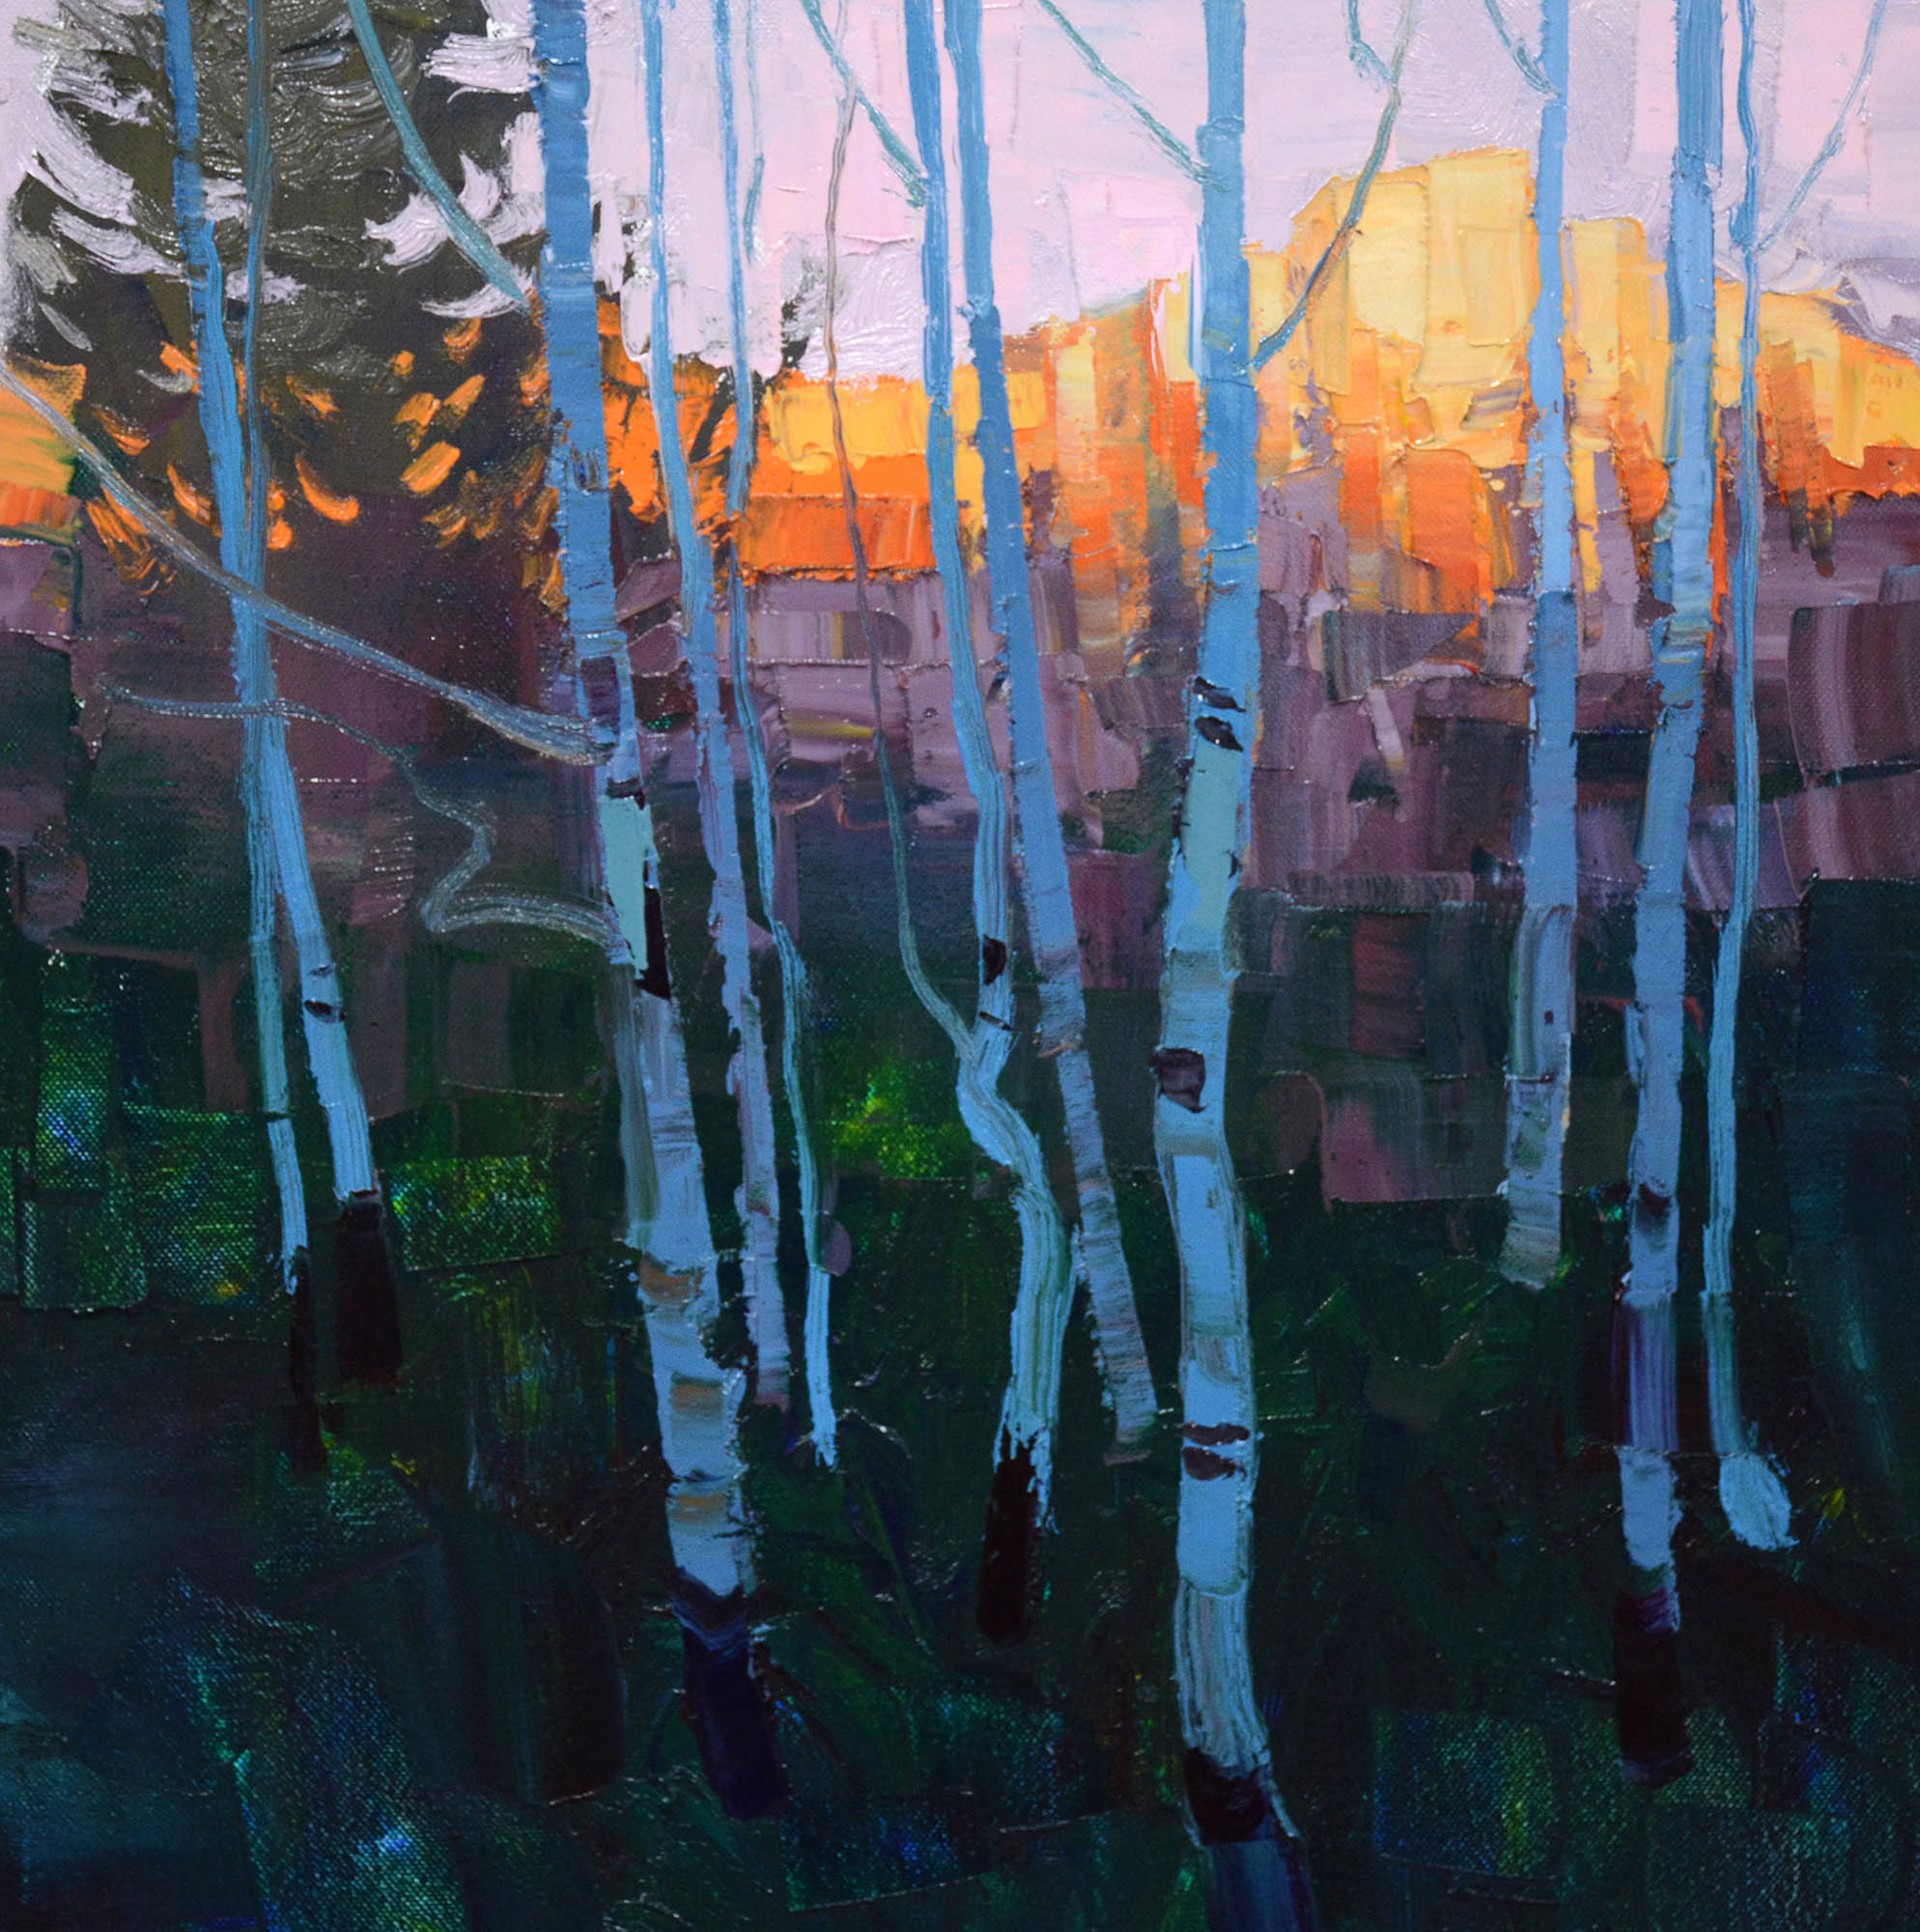 A Contemporary Painting Of Aspens At Sunset By Silas Thompson Available At Gallery Wild